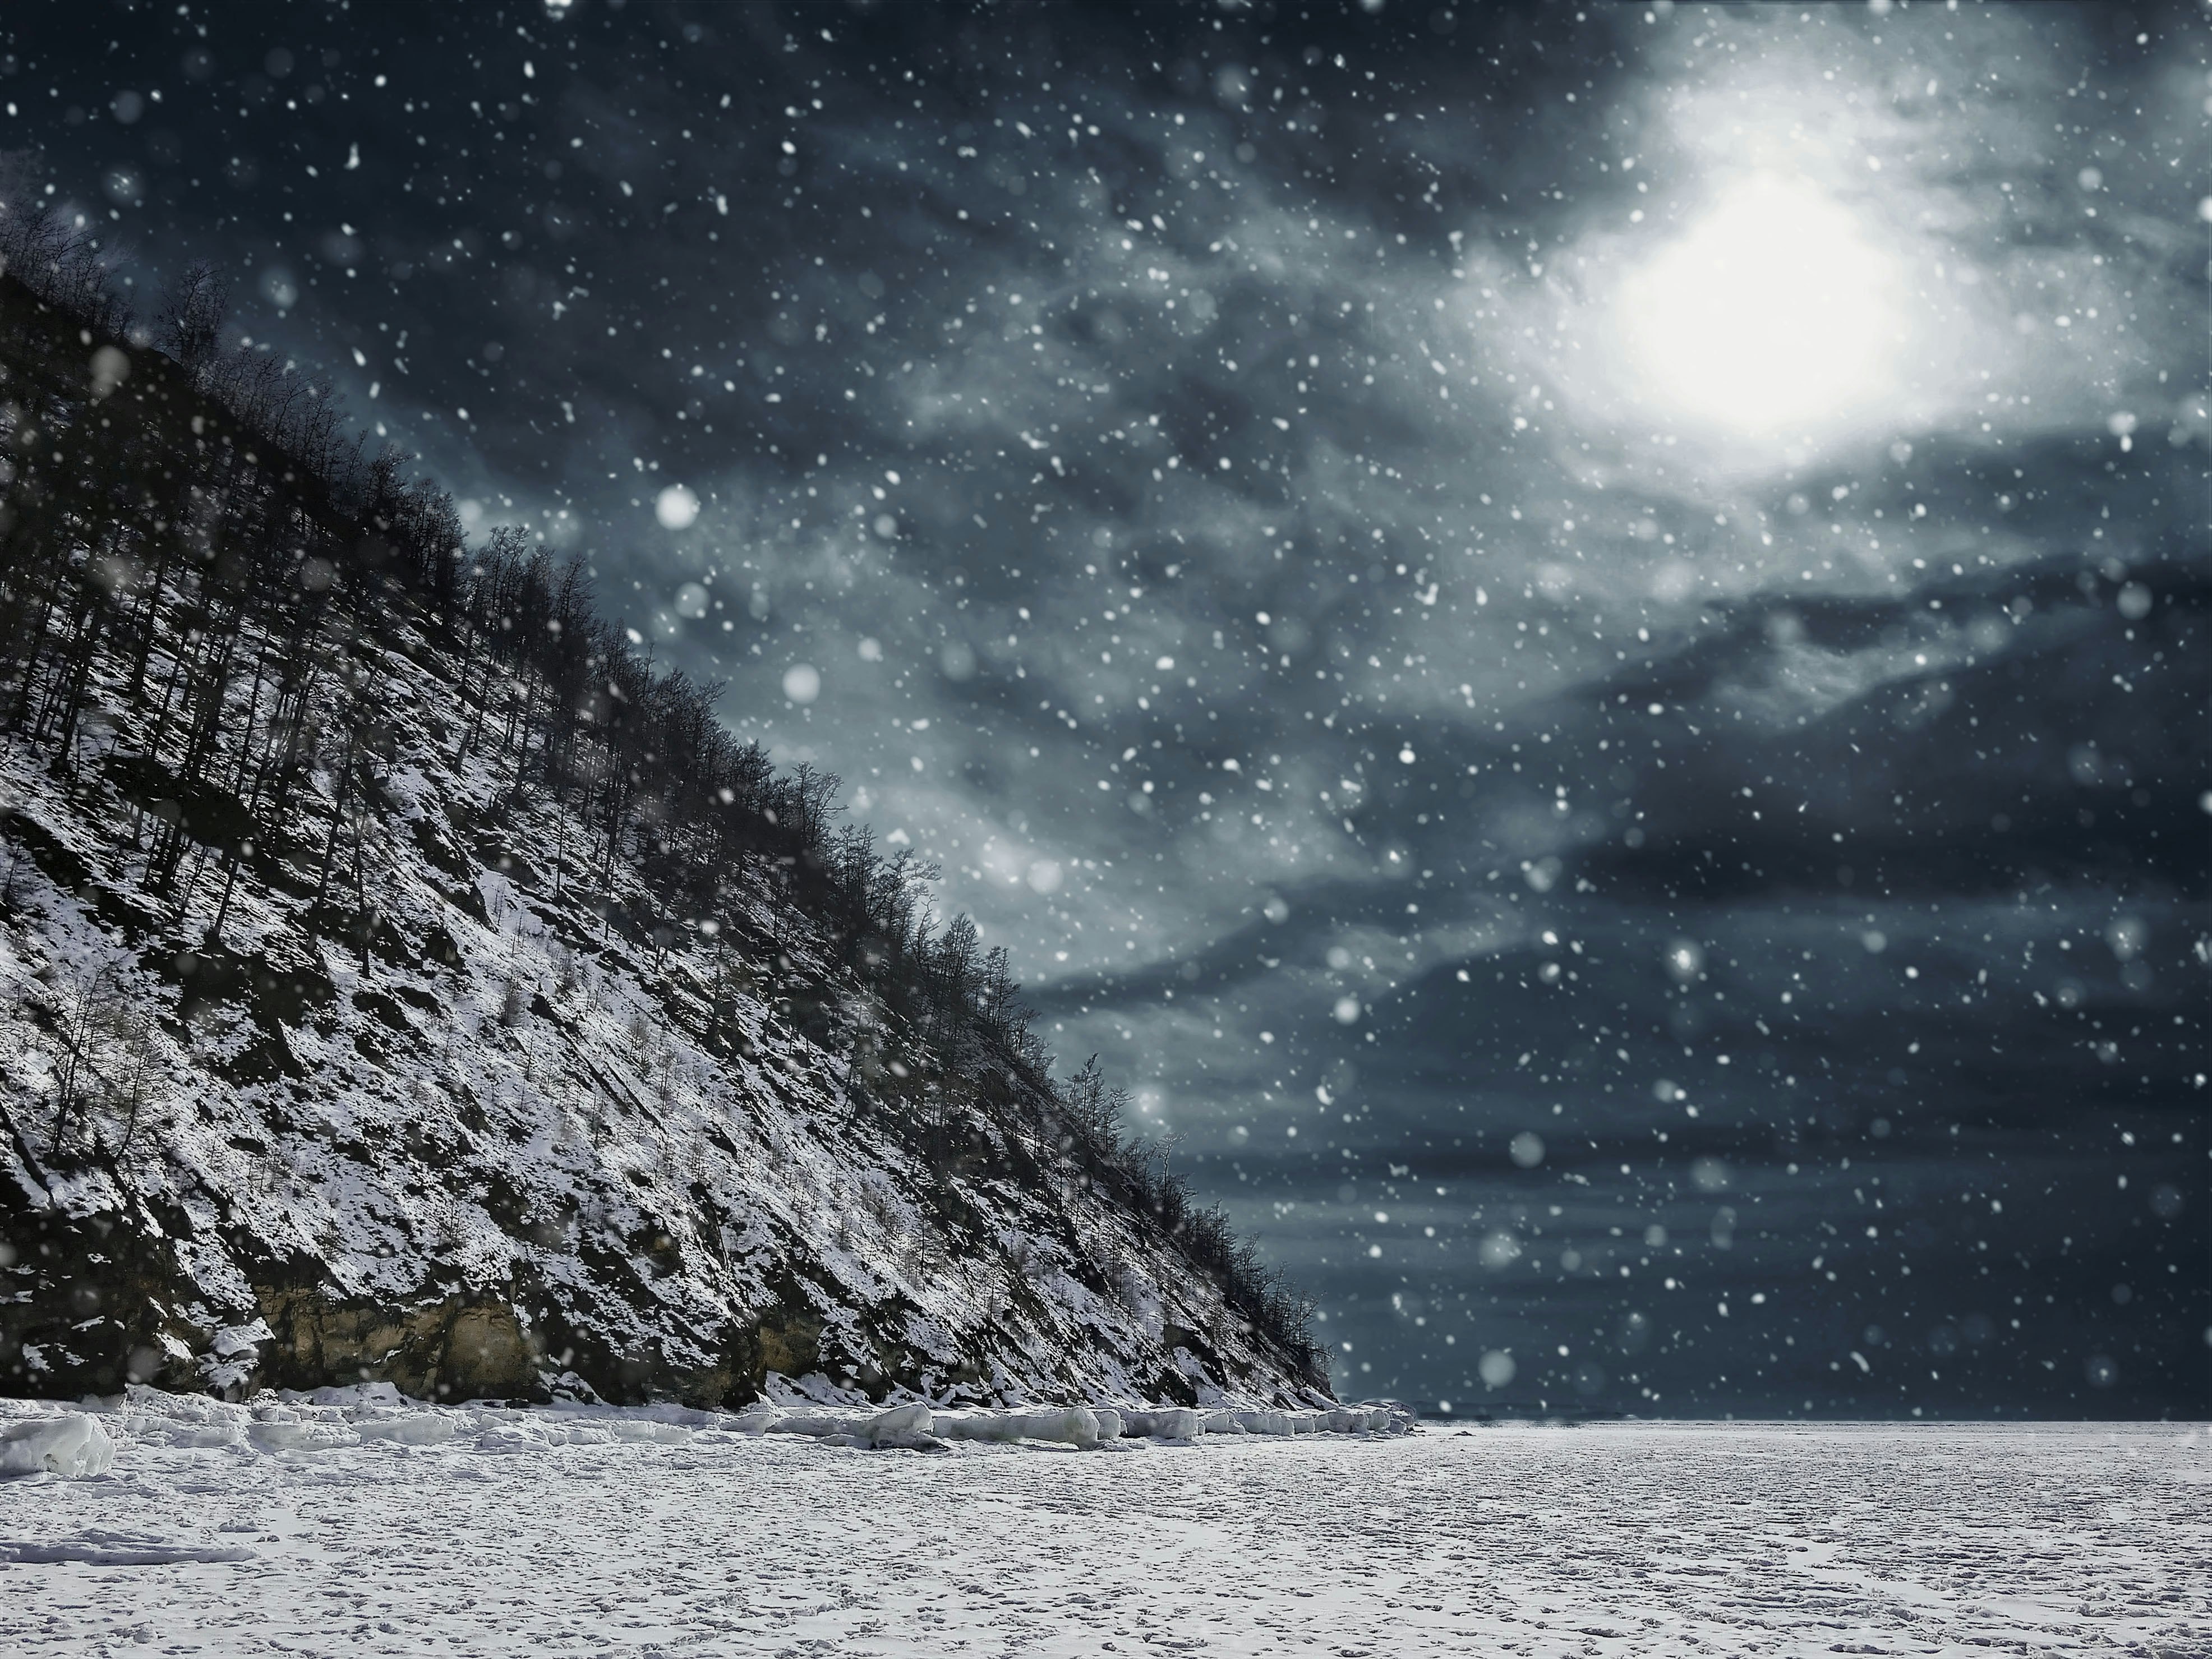 Snowing in a cloudy night sky on a grassy mountain.